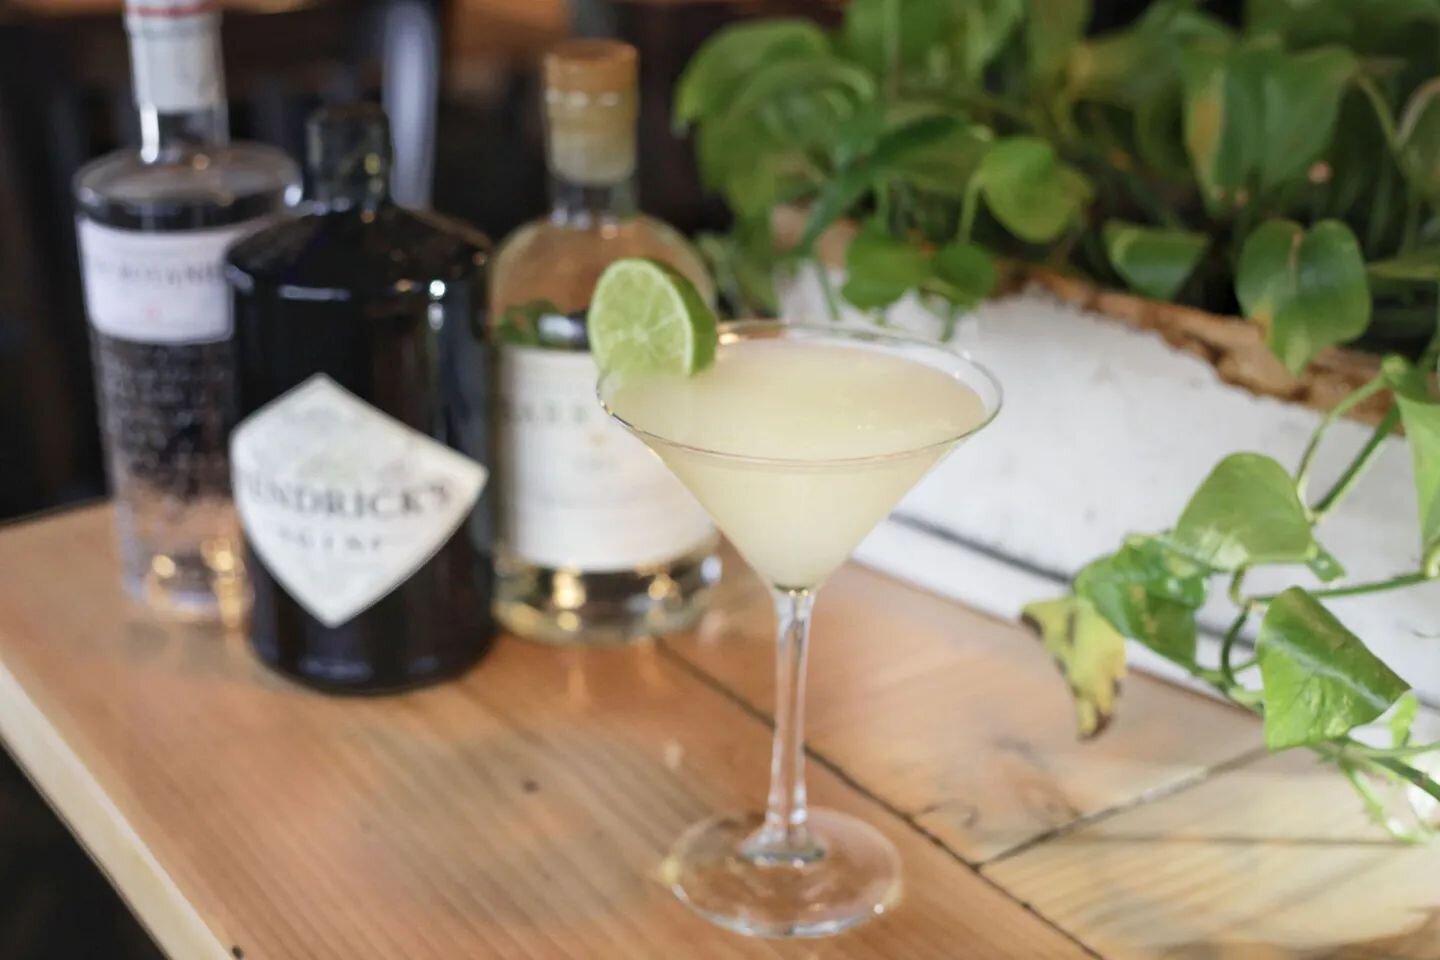 Excuse the Gin-terruption! Come in and try our Gin Gimlet today.
&bull;Fresh squeezed lime juice
&bull;Your choice of Gin
&bull;
#gimlet #drinkoftheday #gin #ginlover #hendricks #botanistgin #aviationgin #localpub #drinksofinstagram #drinklocal #loca